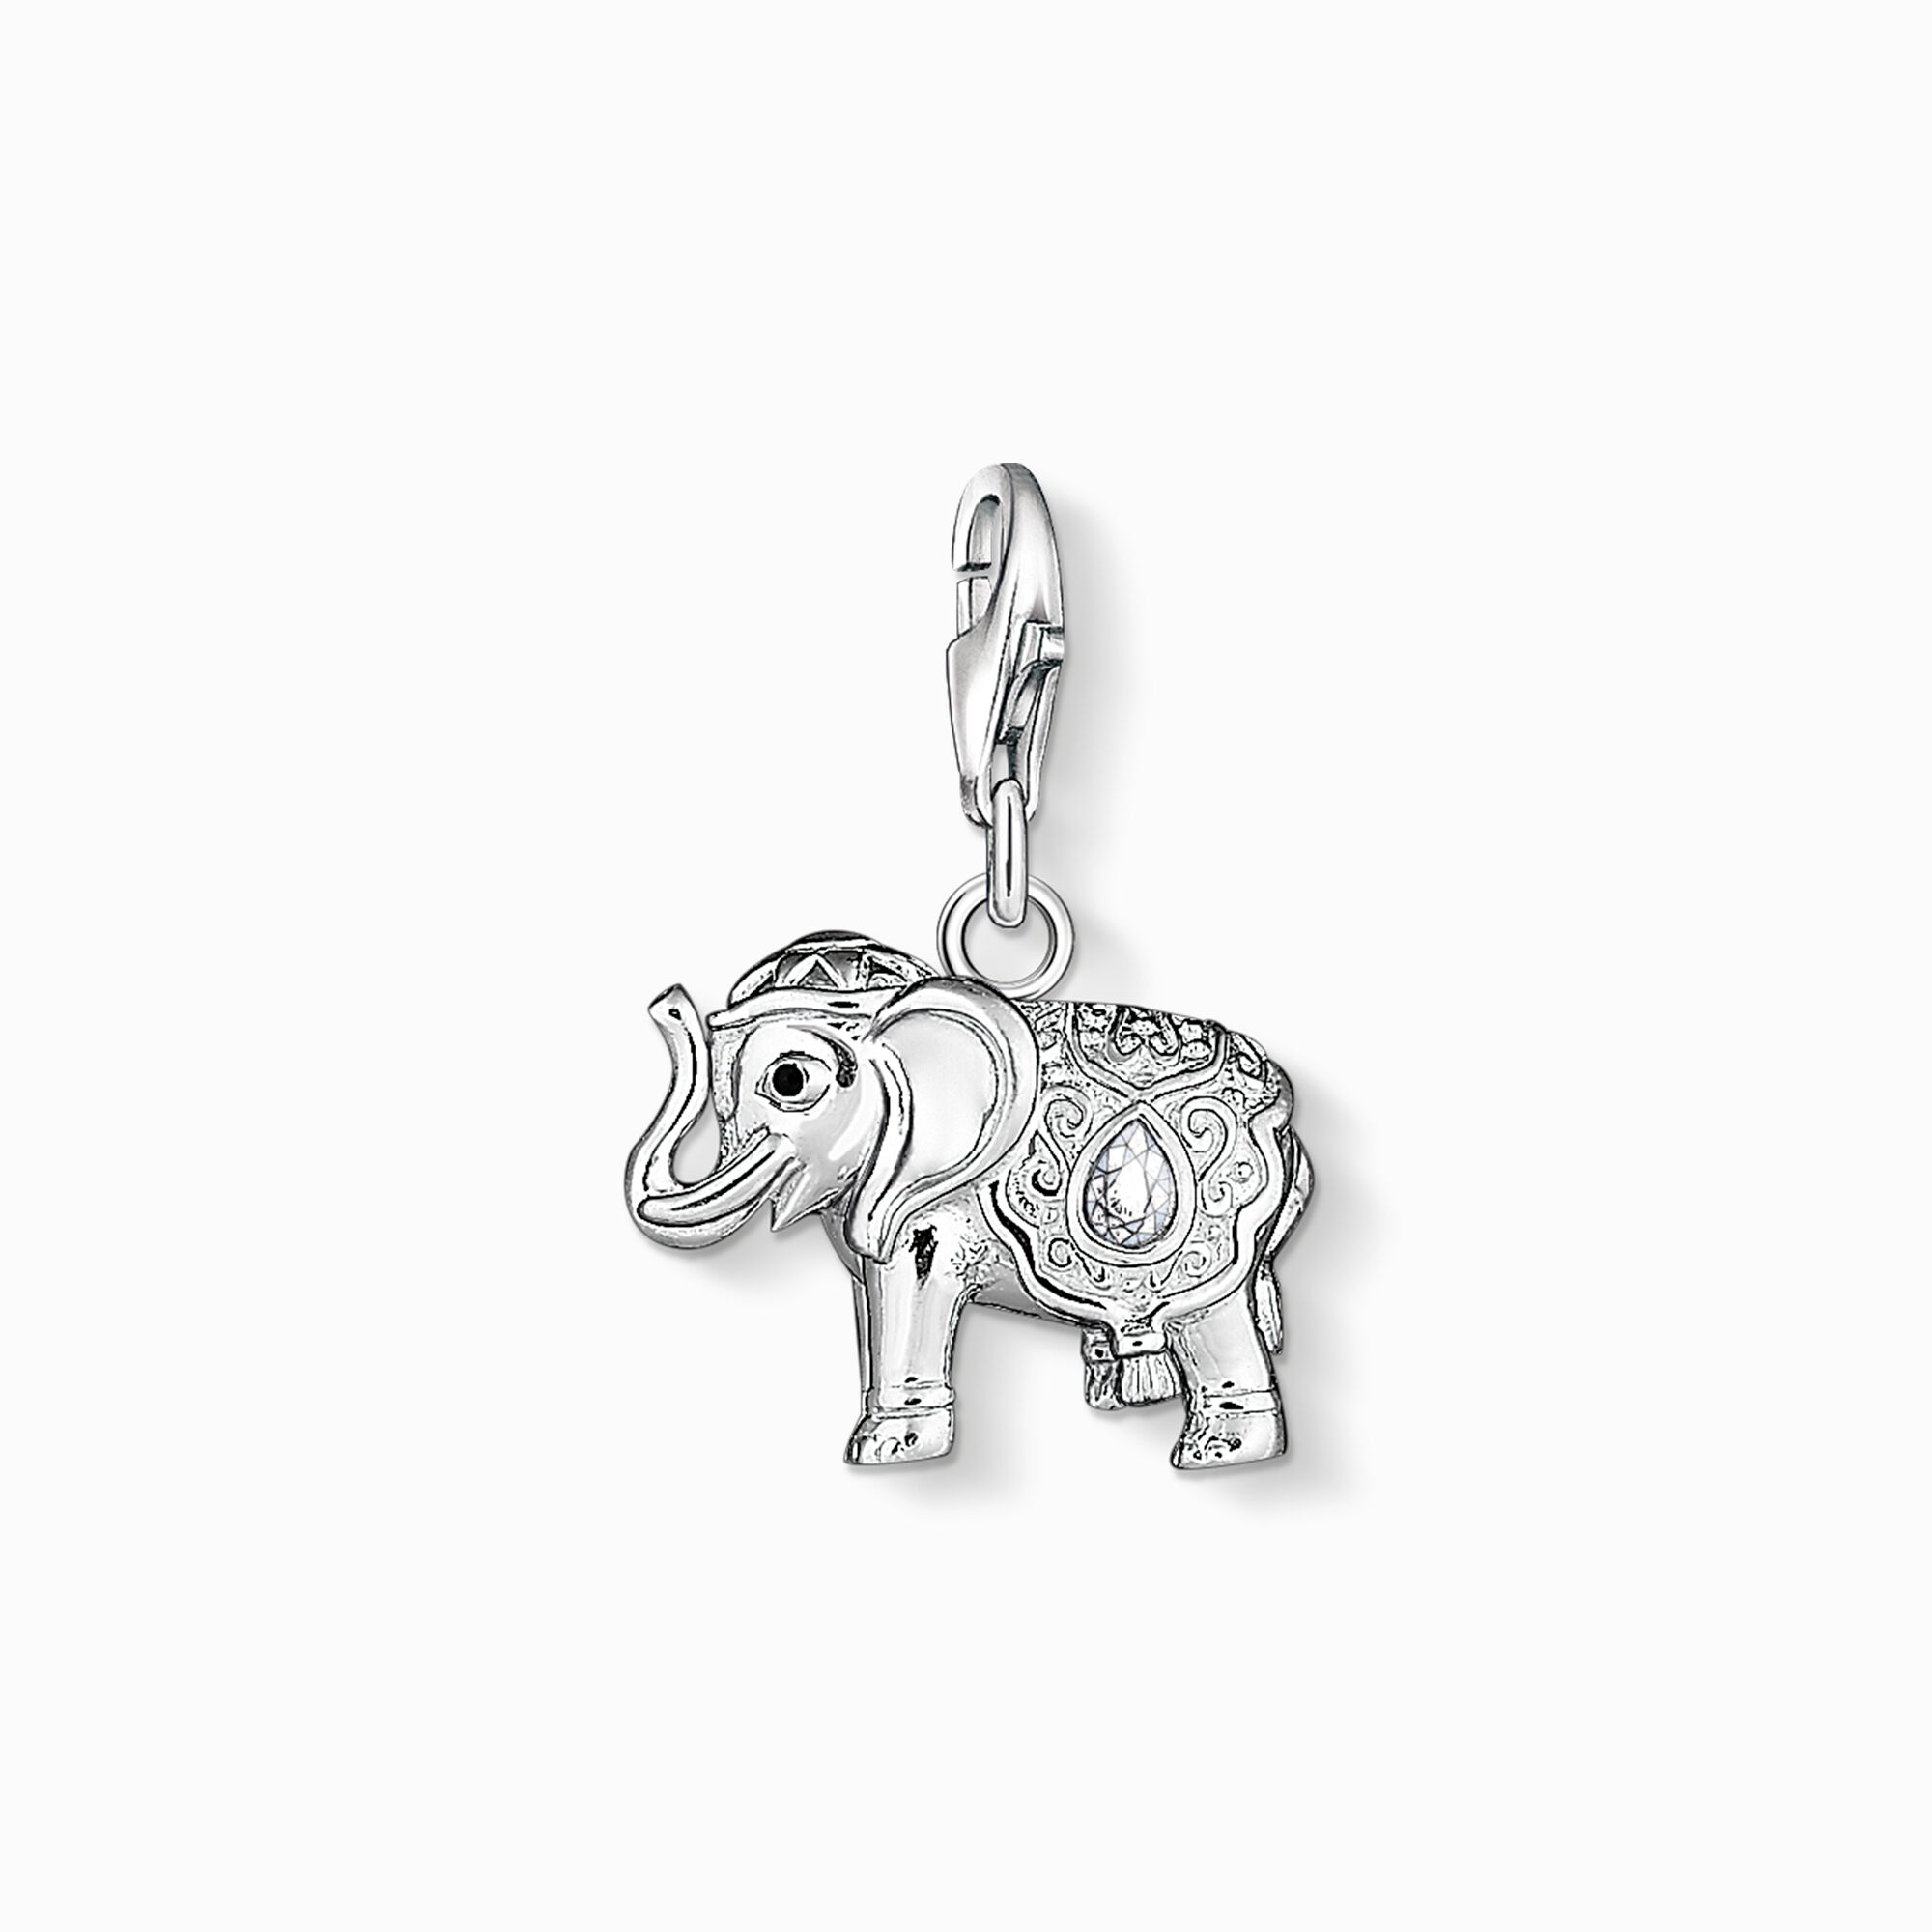 Charm pendant Indian elephant from the Charm Club collection in the THOMAS SABO online store